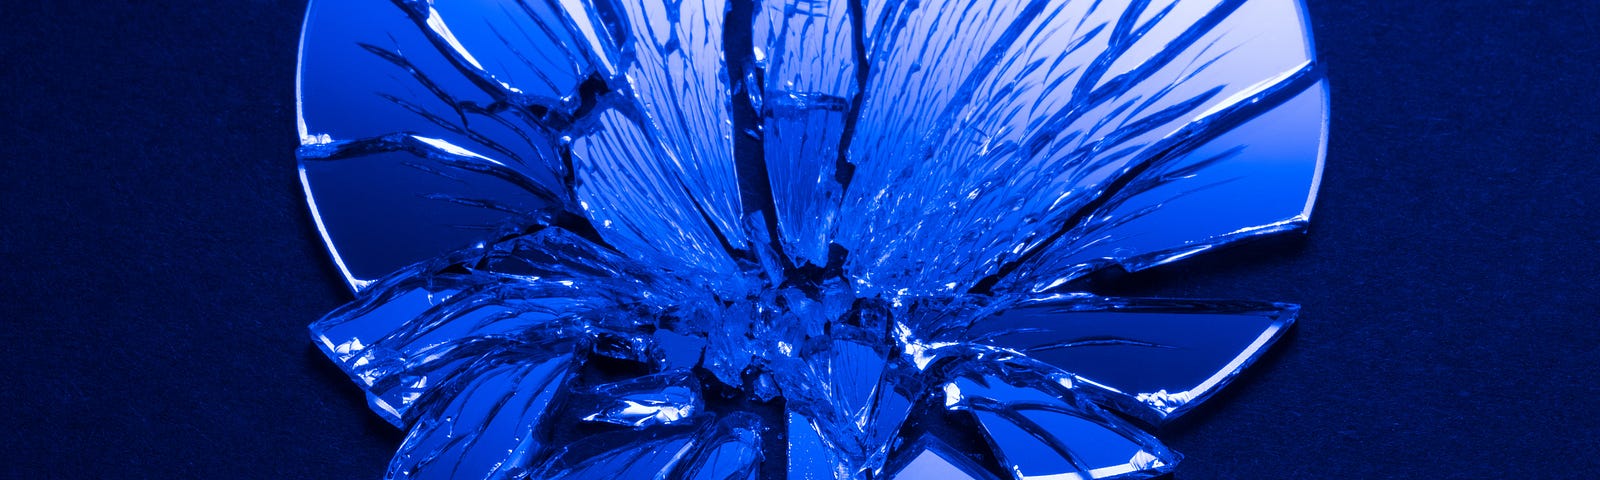 A blue-tinted photo of a shattered mirror.